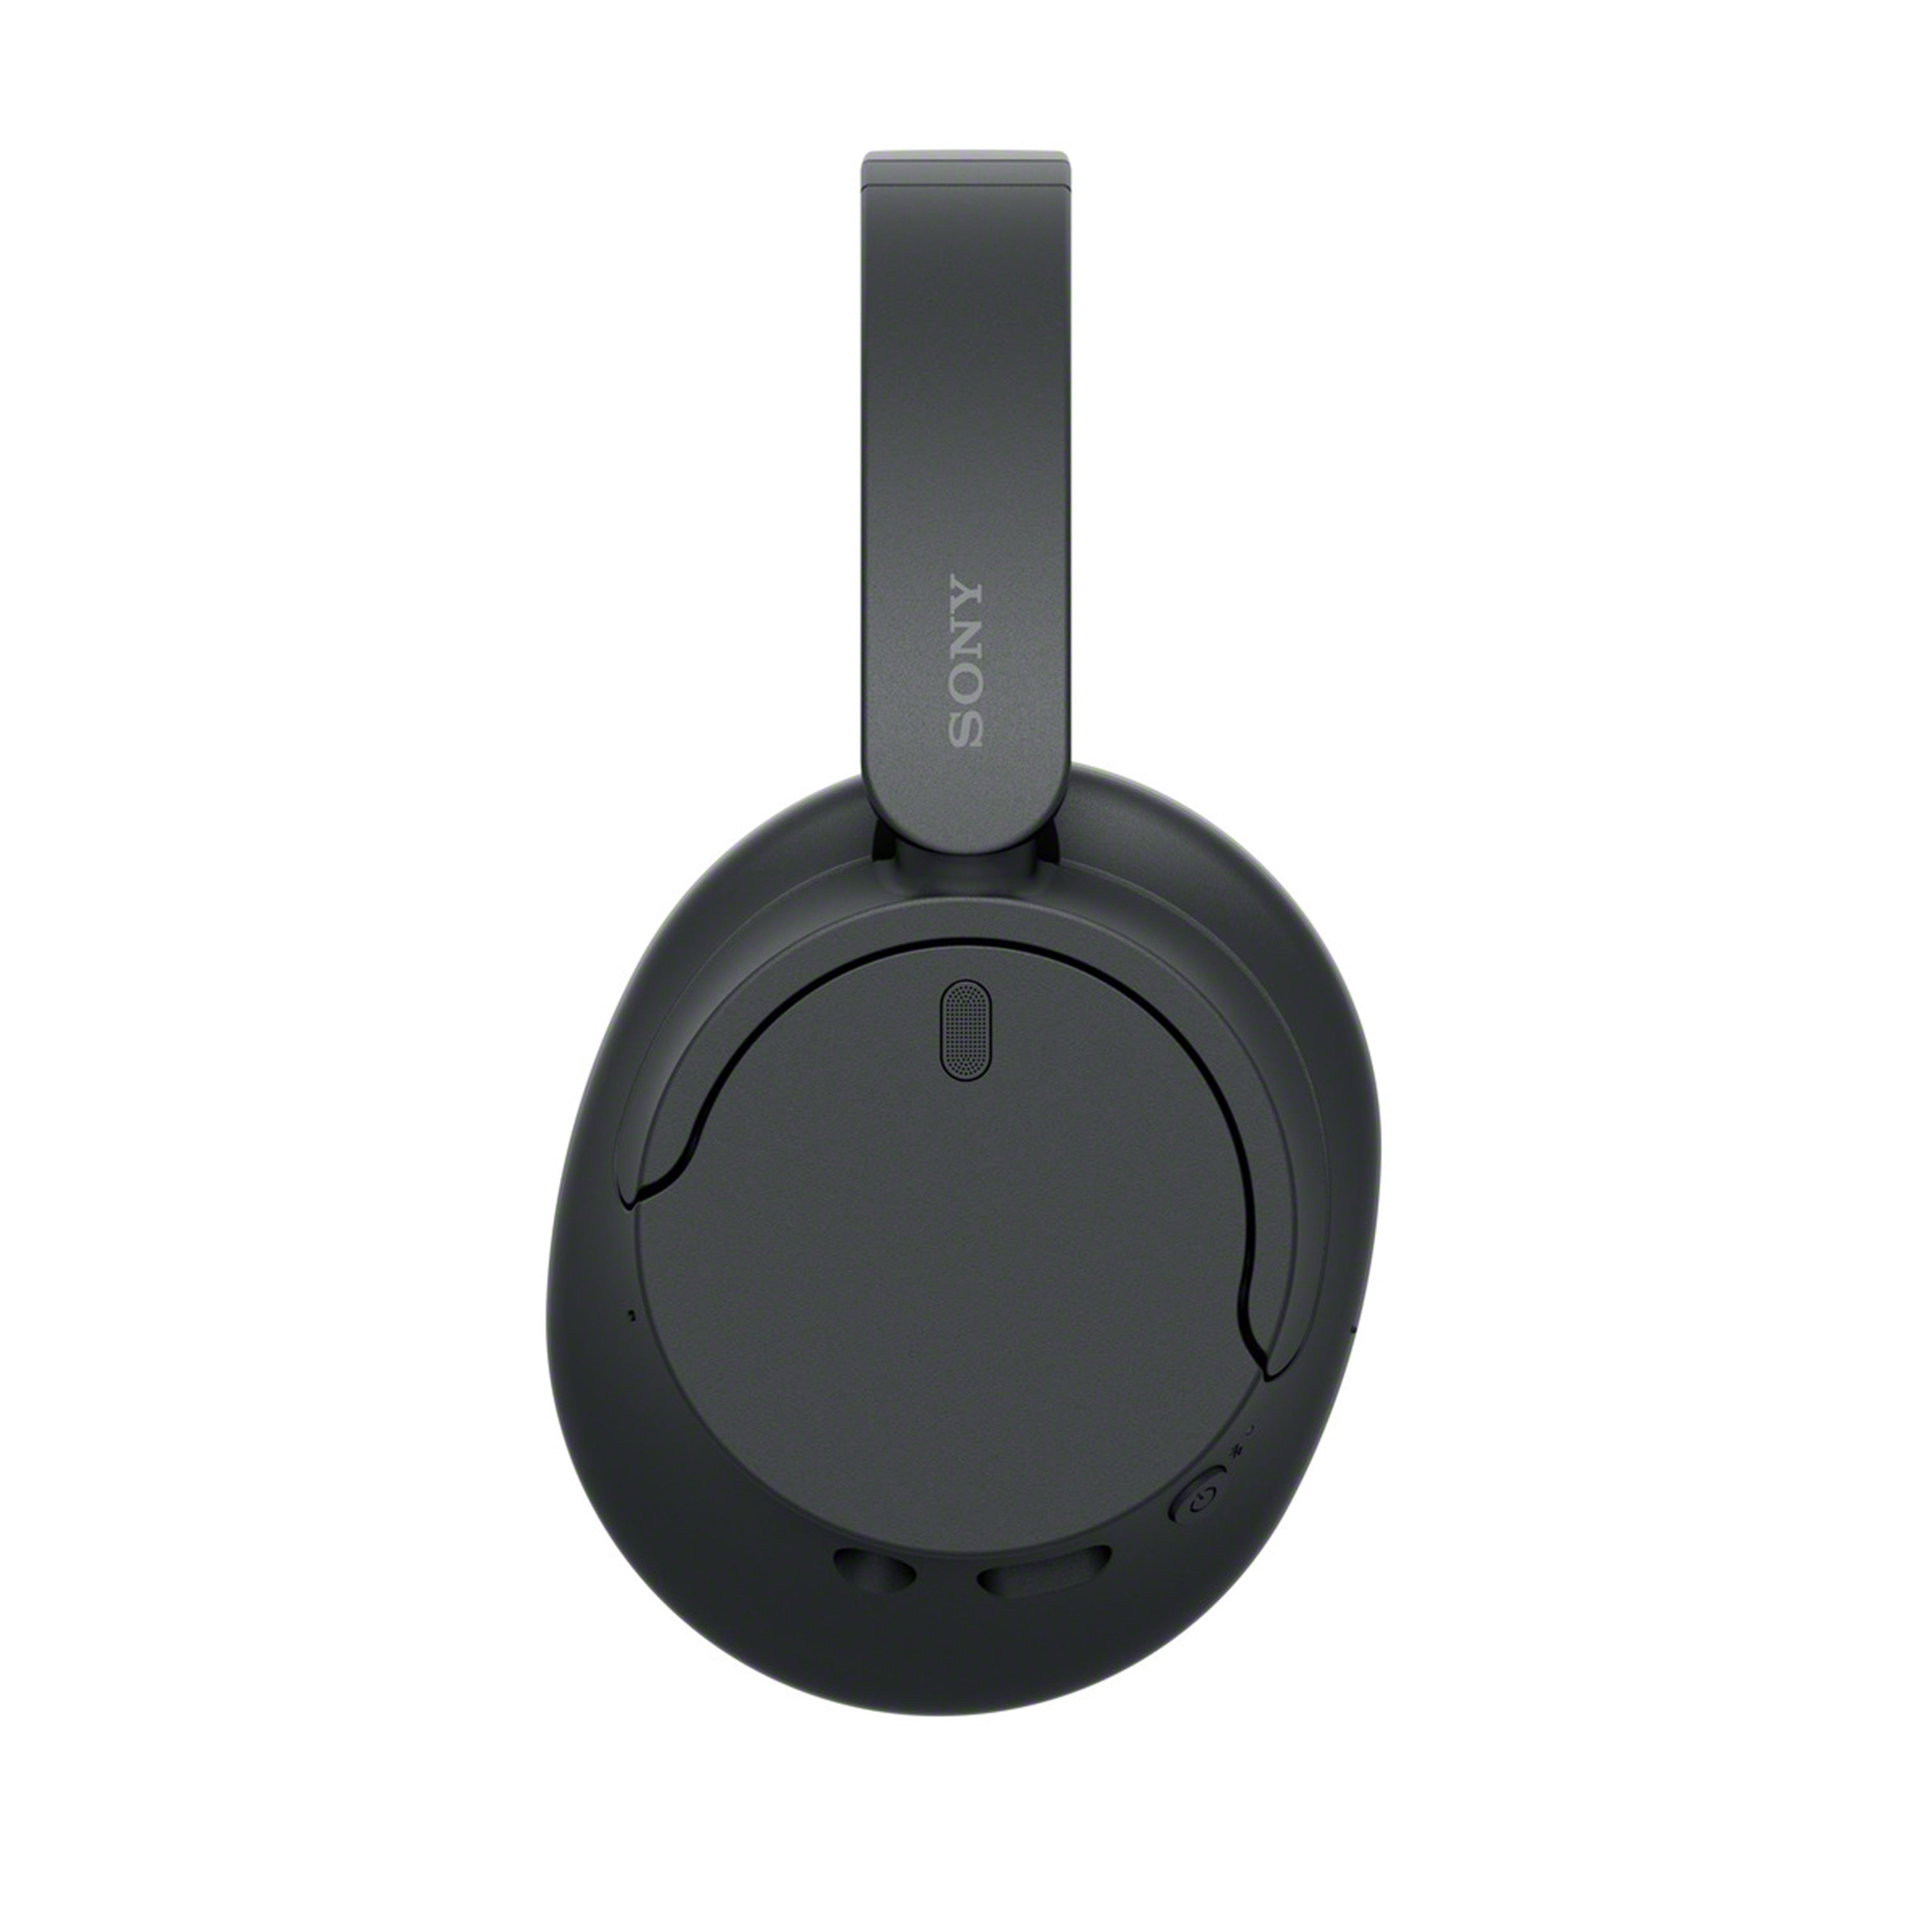 WH-CH720N Wireless Noise Cancelling Headphone